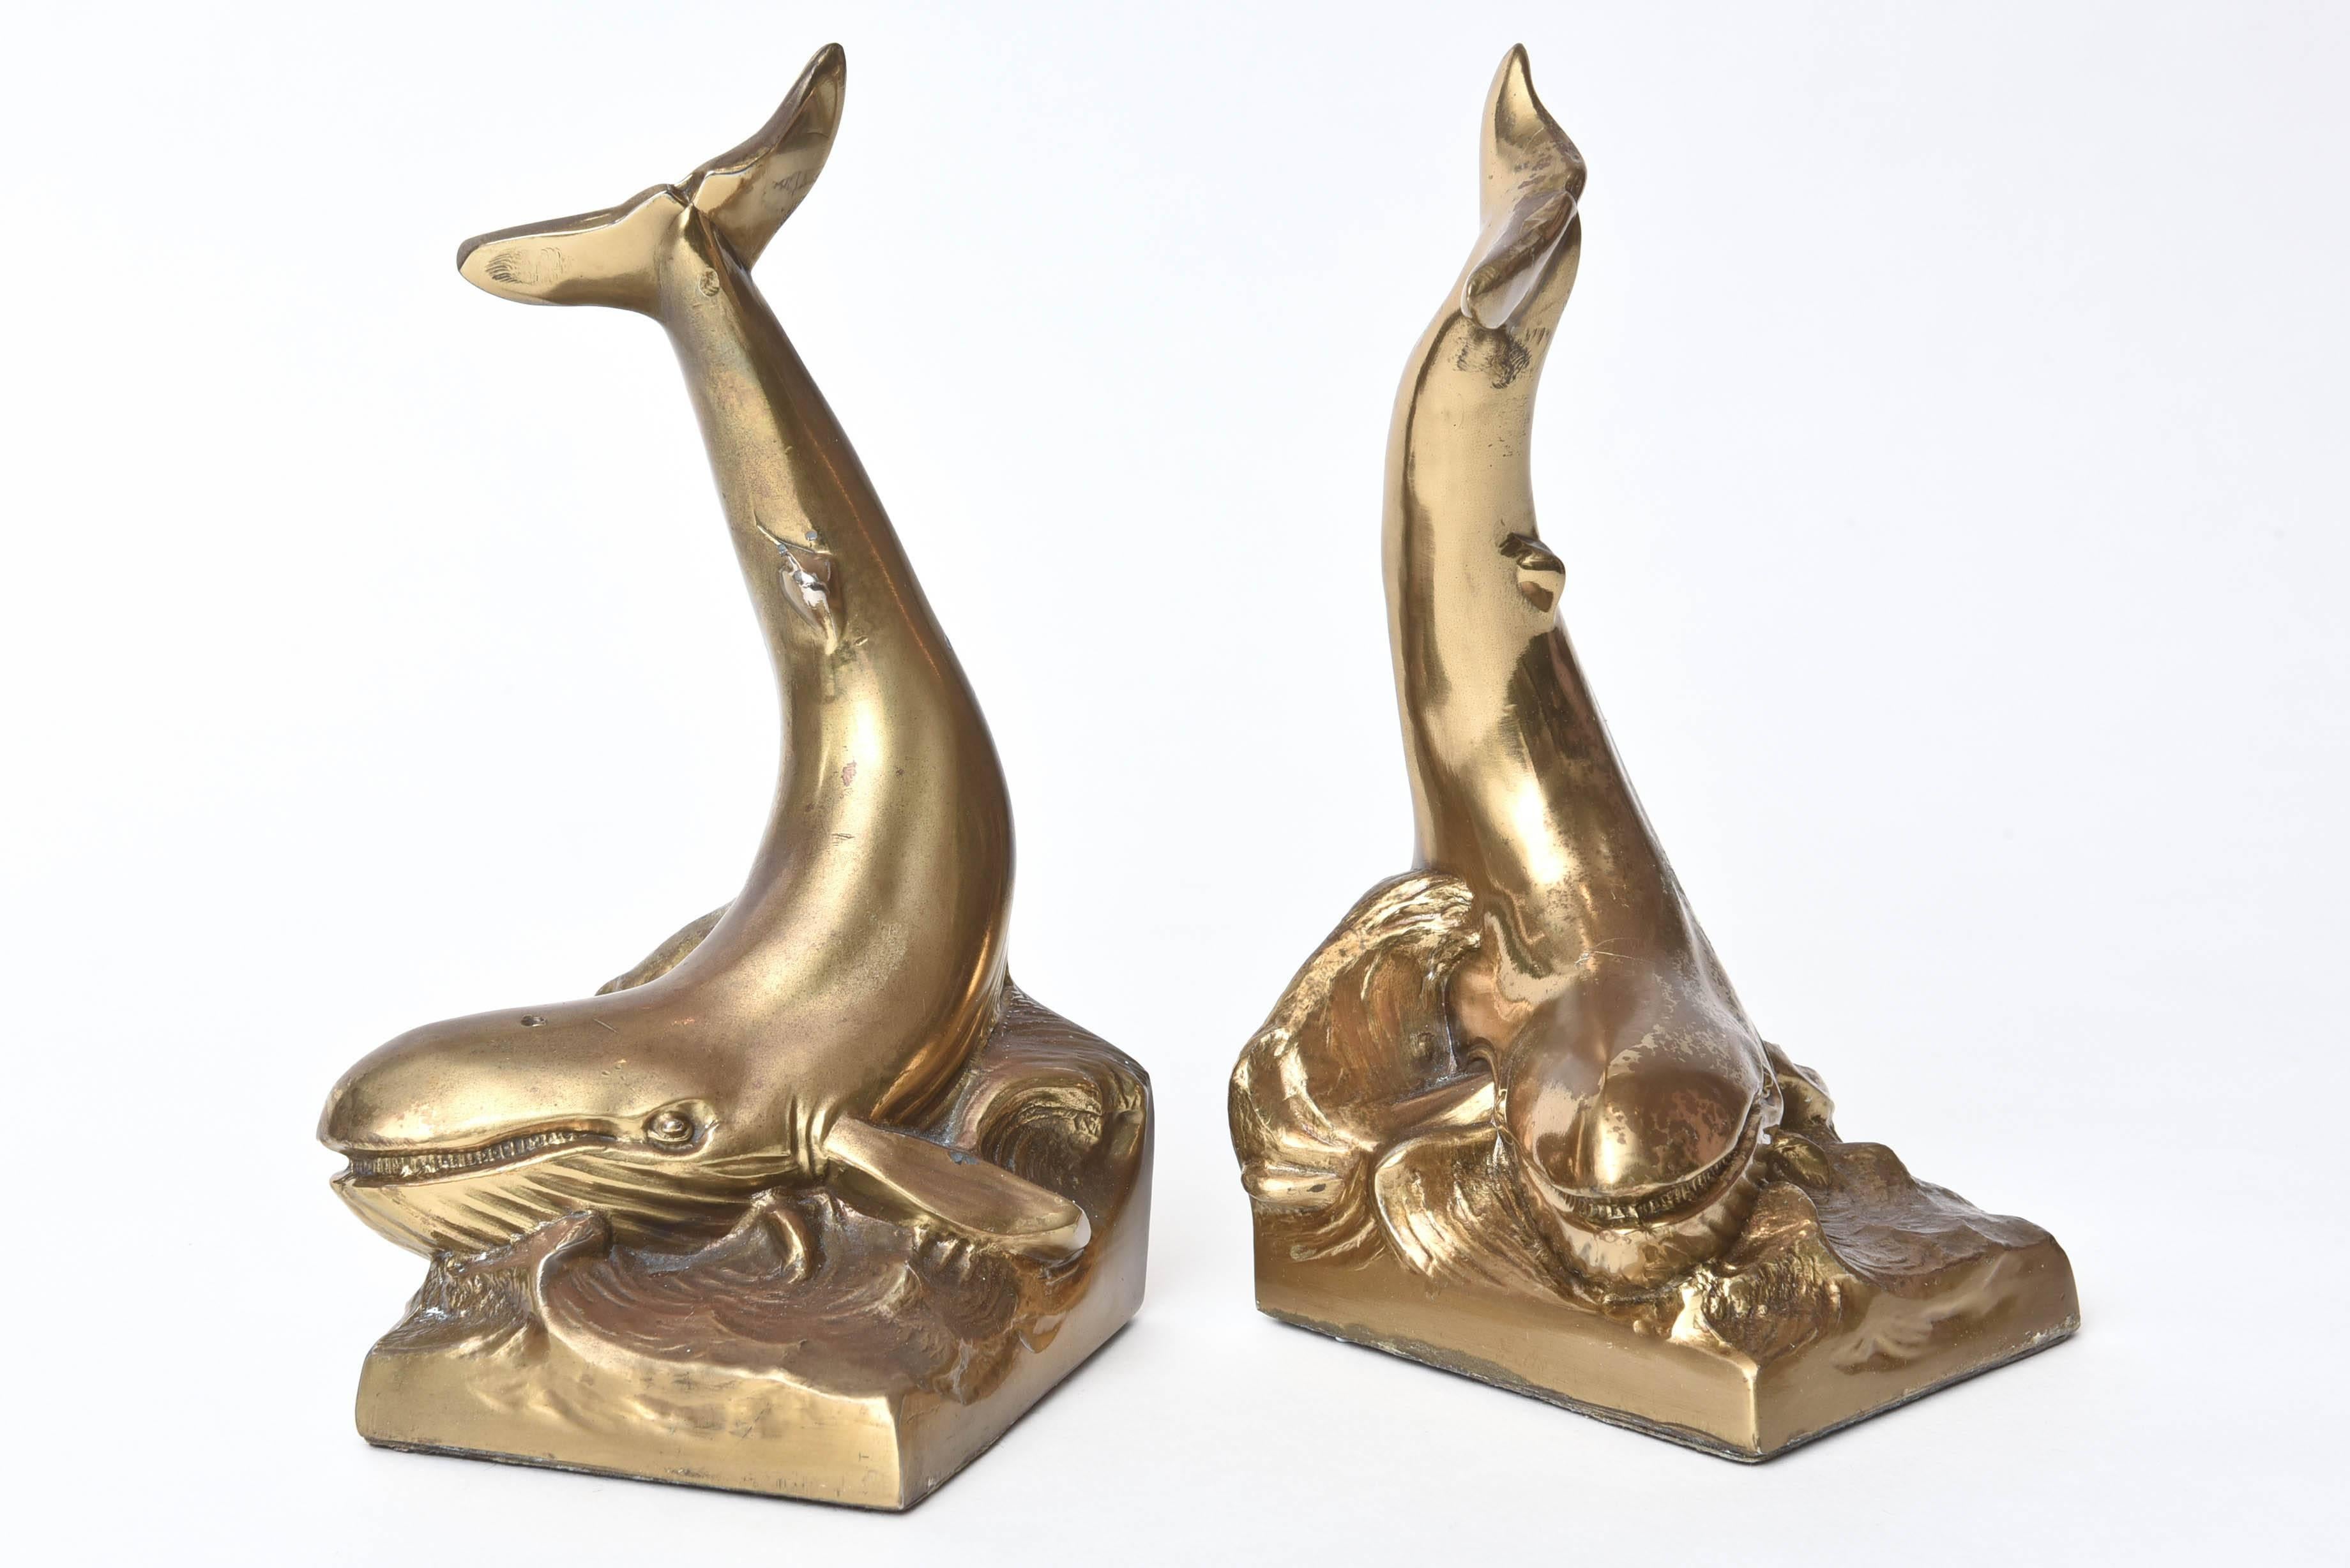 We love these charming nautical book ends. Nicely cast with crisp detail, patina and good weight. Please let us know if we can provide any other additional information on this unique pair. We could find no hallmarks but we estimate them to be